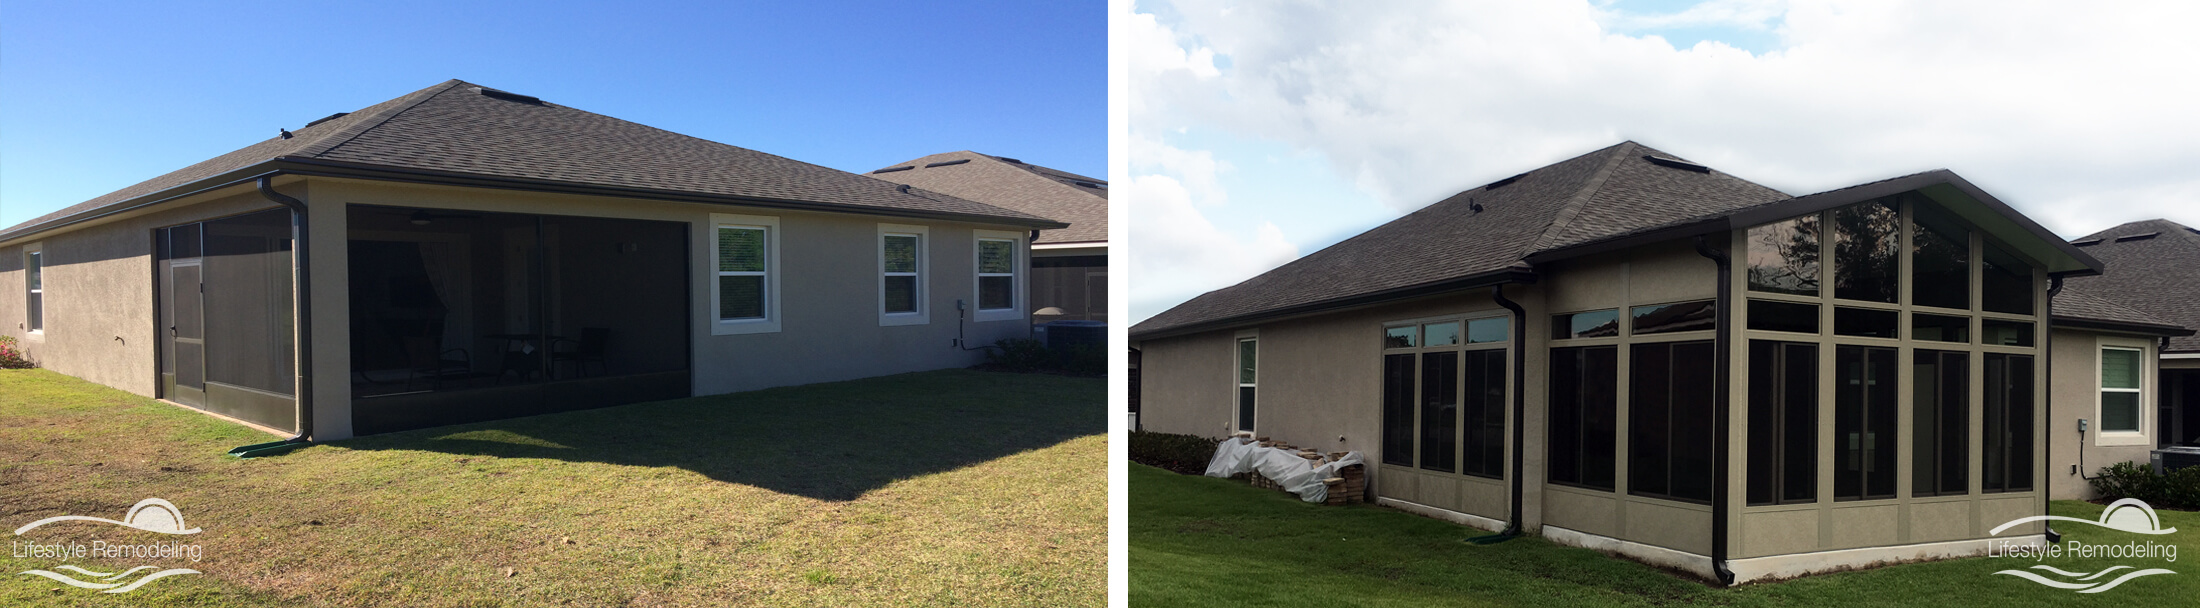 Gable Sunrooms Tampa Florida Before & After